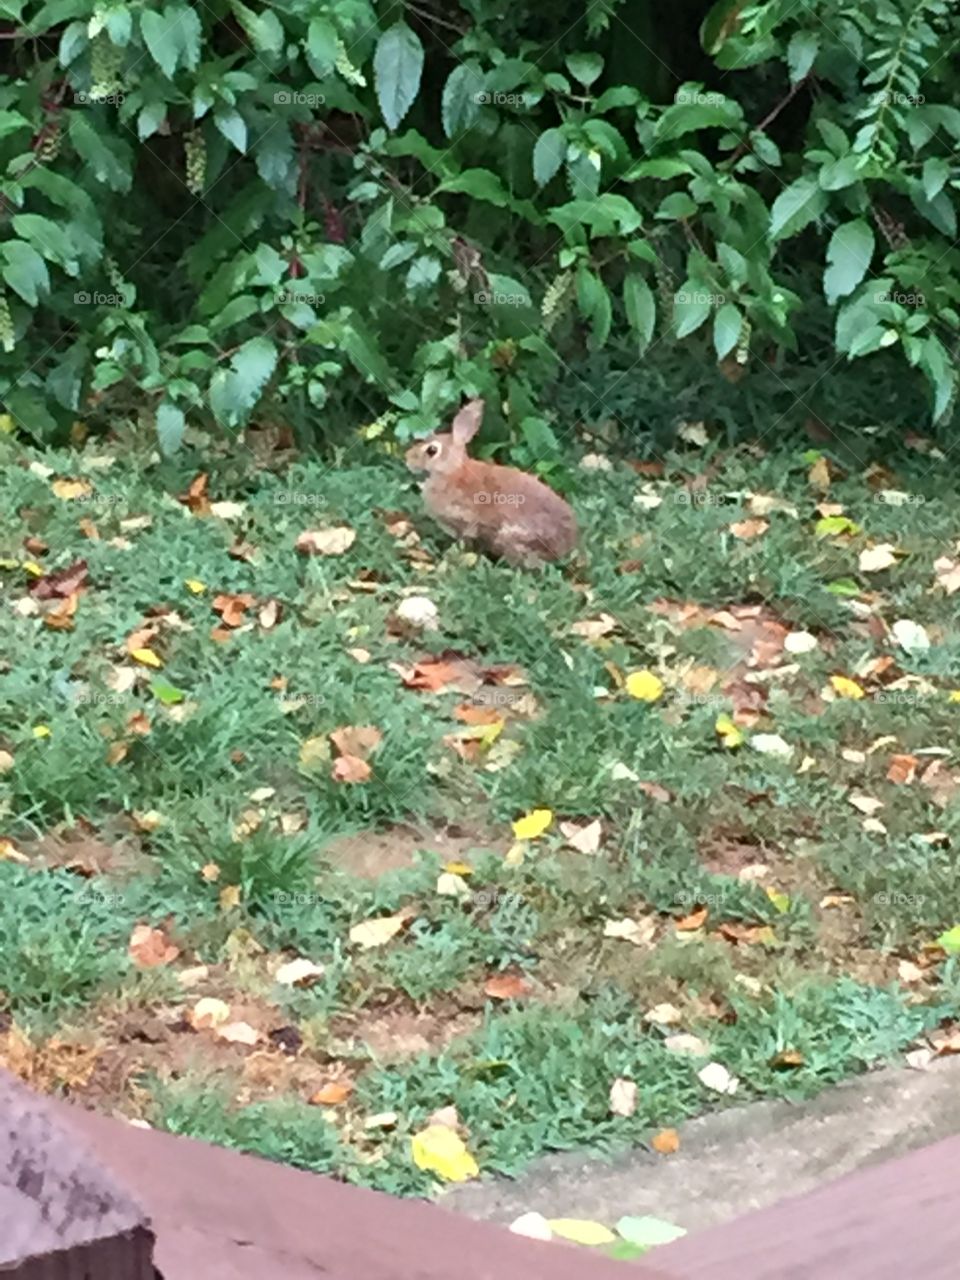 This is the hare who lives in our back yard (aka) Mr.Wisekins. For running away from my dogs every time! He is so wise 😂